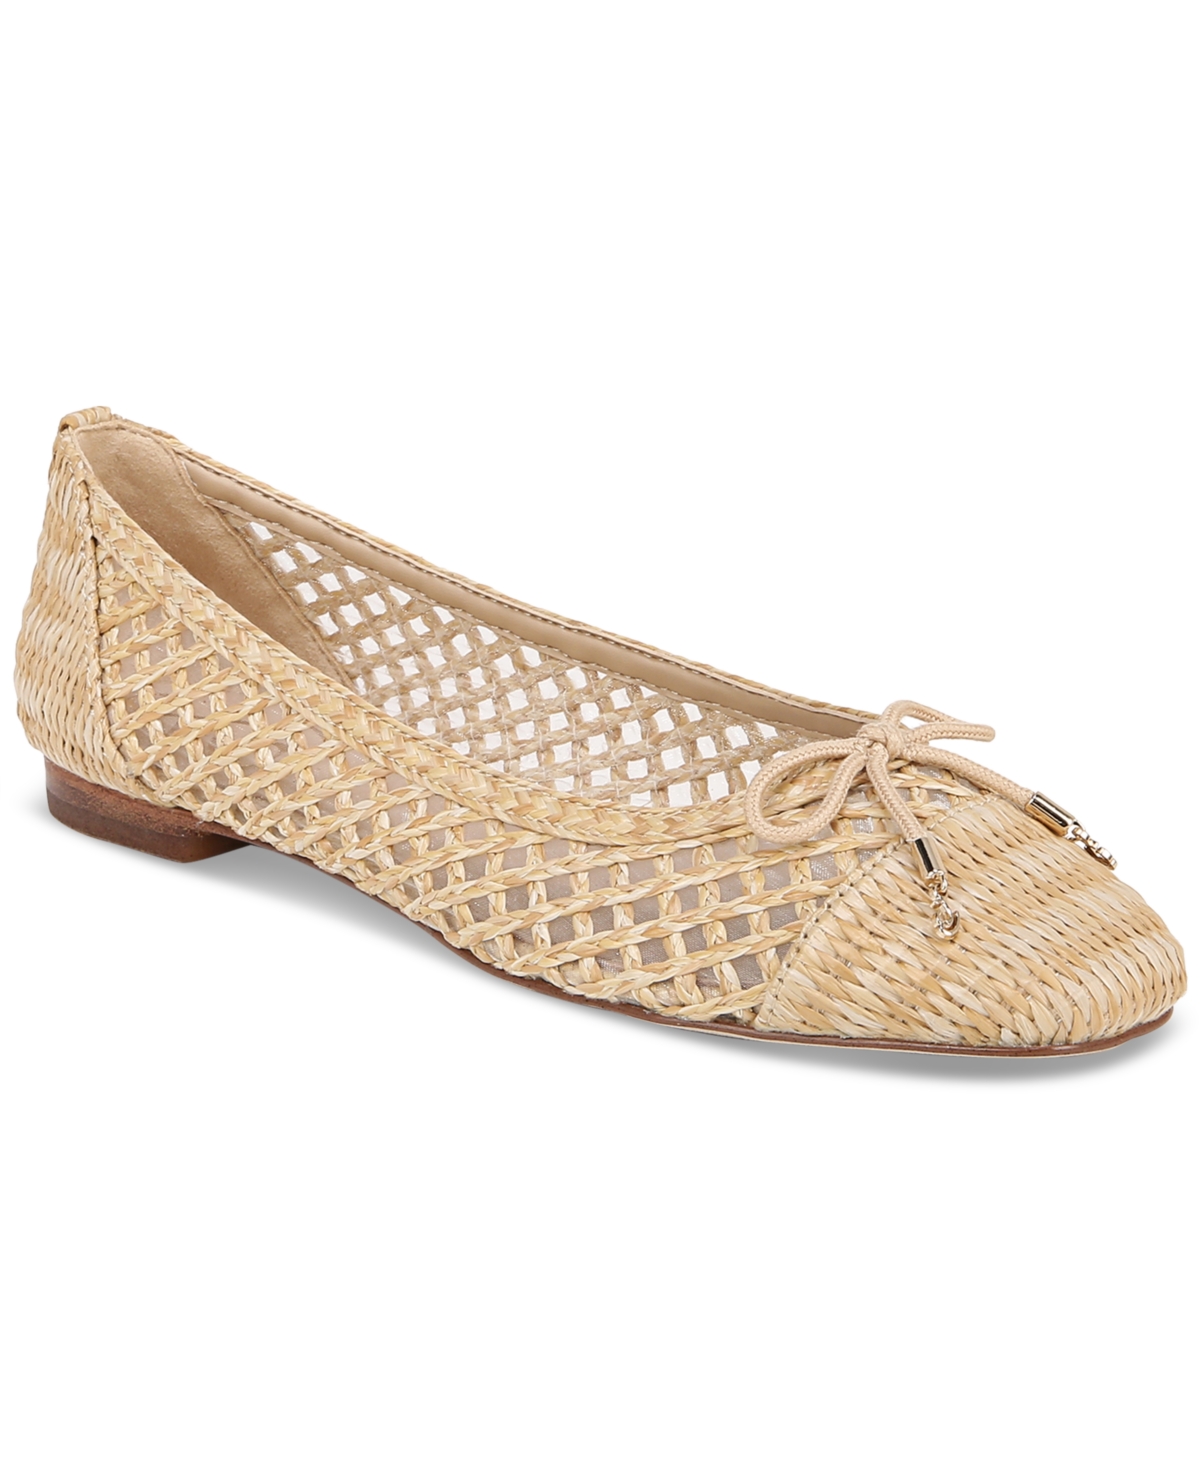 Women's May Wicker Ballet Flats - Cuoio Brown